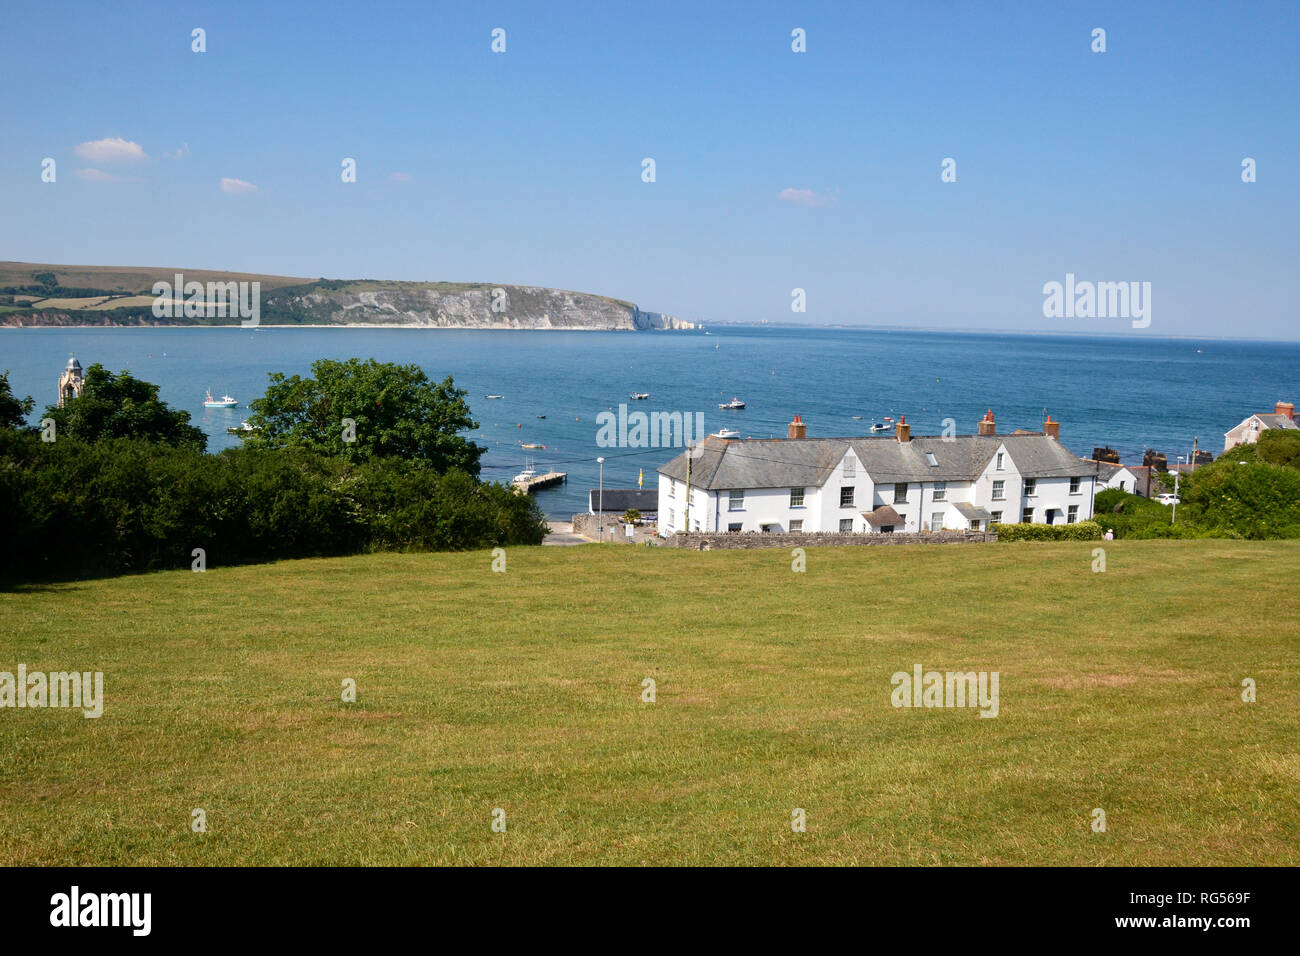 Holiday Cottages On The Cliff Top Near Peveril Point Swanage